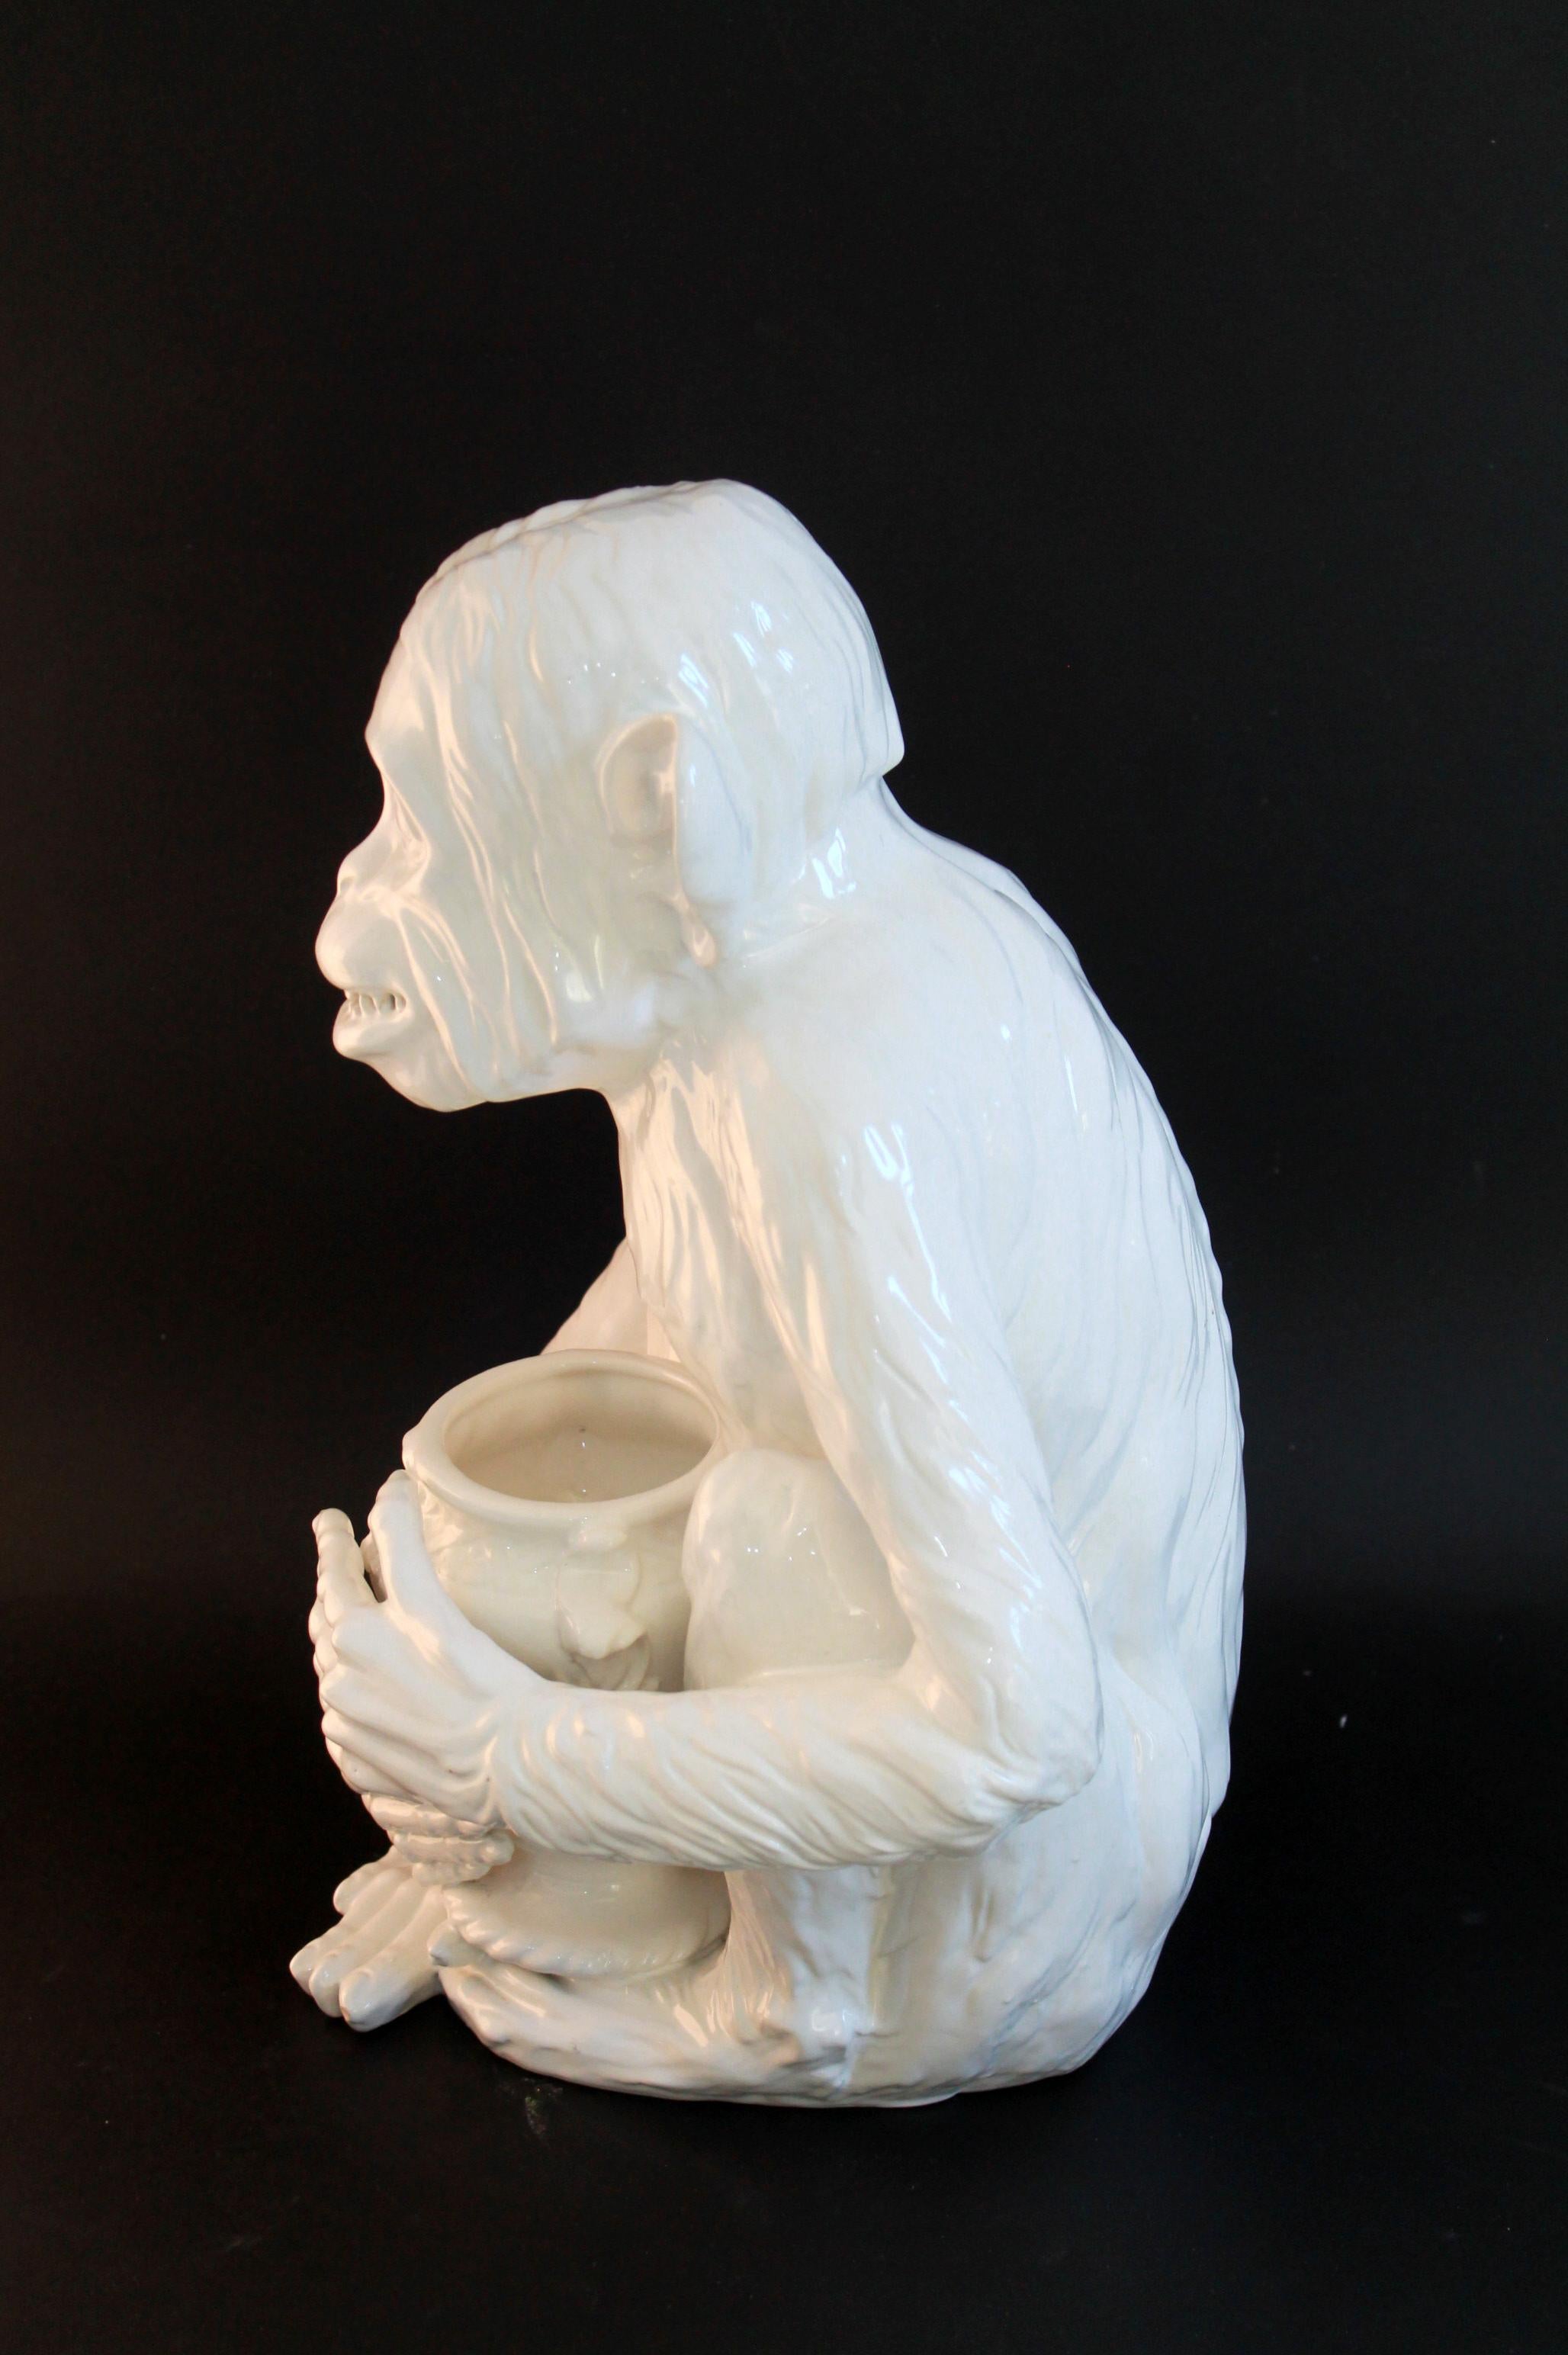 Rare 1950s Italian-made Hollywood regency ceramic jardiniere monkey seated holding a vase/urn.

Measurements: 
Jardiniere - 41h x 24d x 32w cm

Condition: 
Overall excellent condition and presented unrestored with no visible signs of losses, chips,